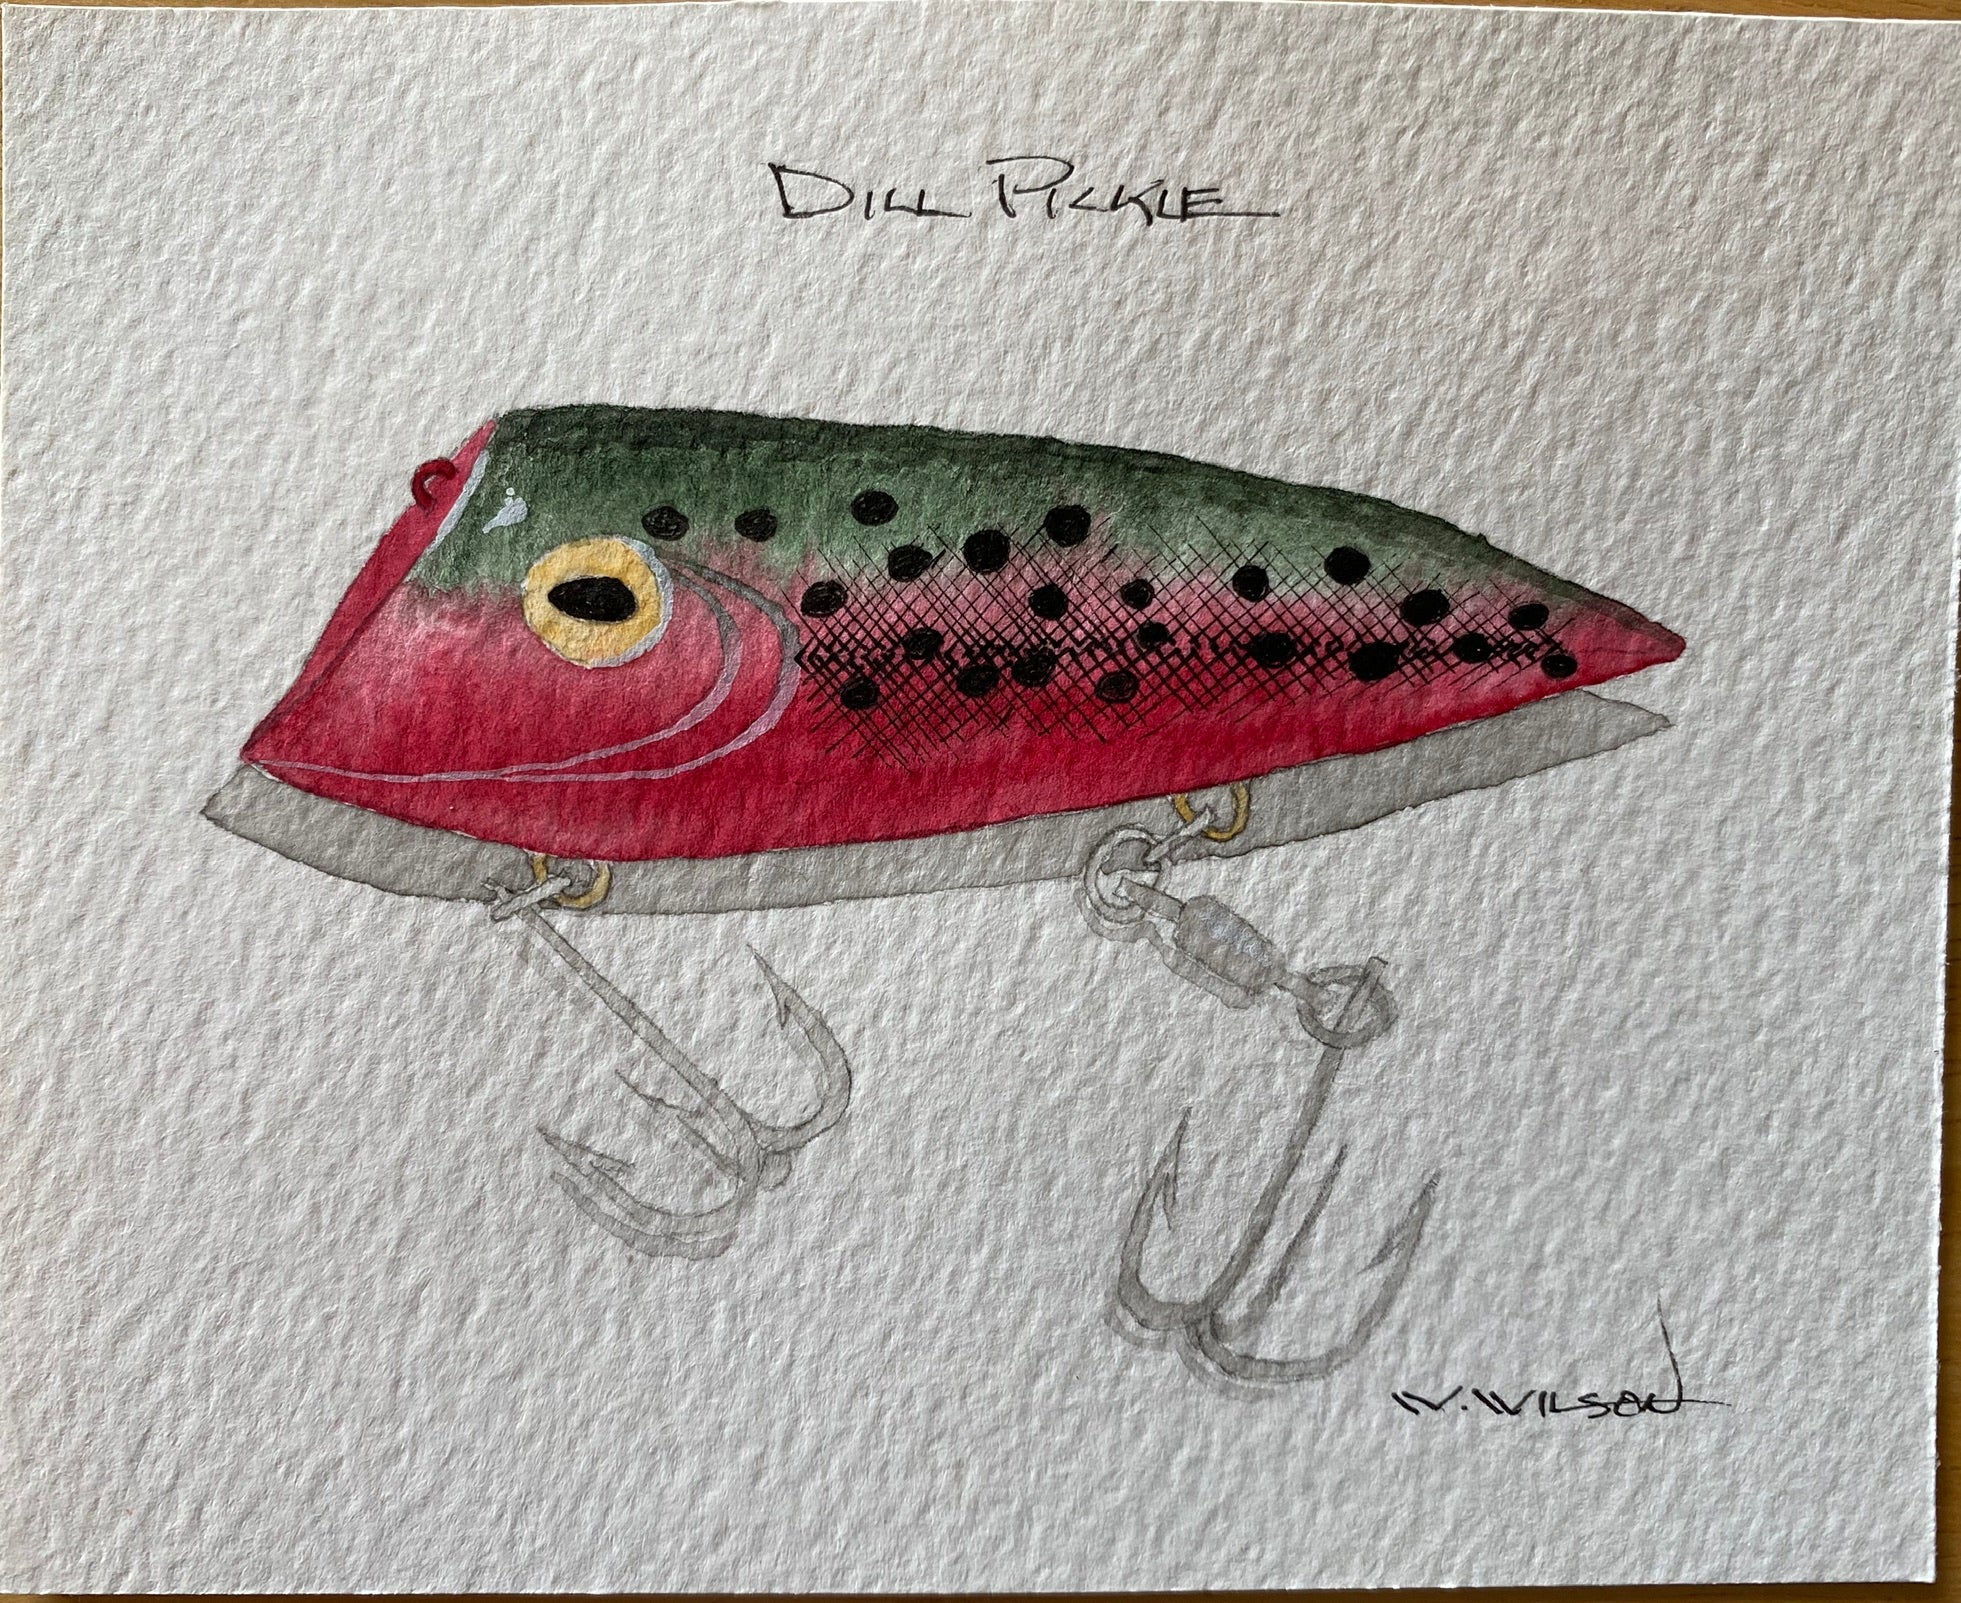 Lyman Lures - new design release - Dill Pickle